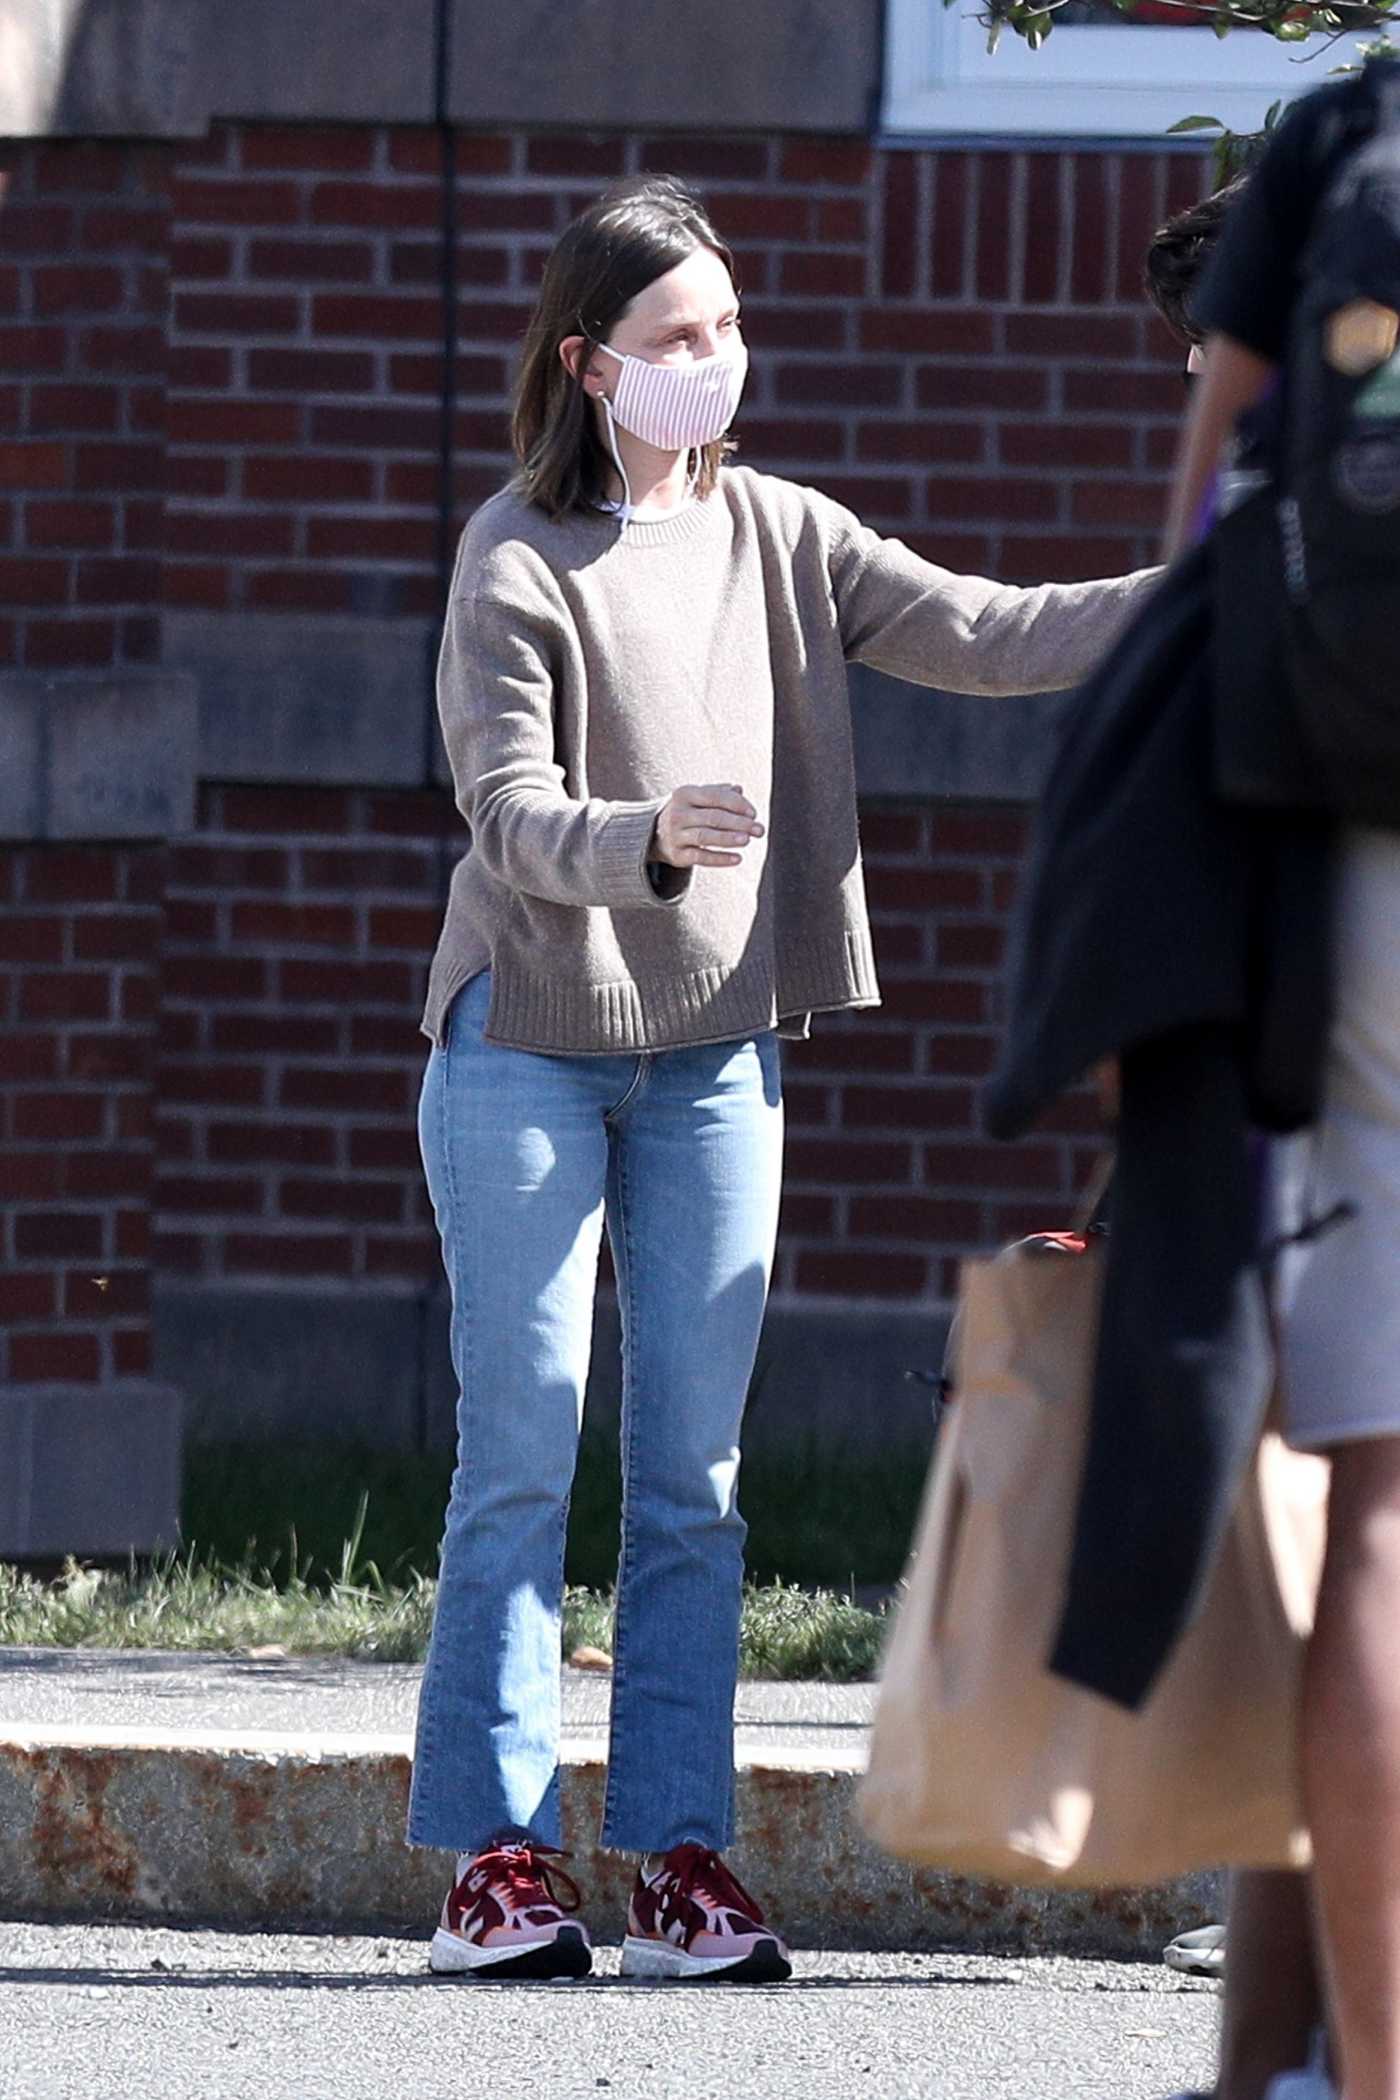 Calista Flockhart in a Knit Cream Sweater Was Seen Out in Amherst 08/20/2020